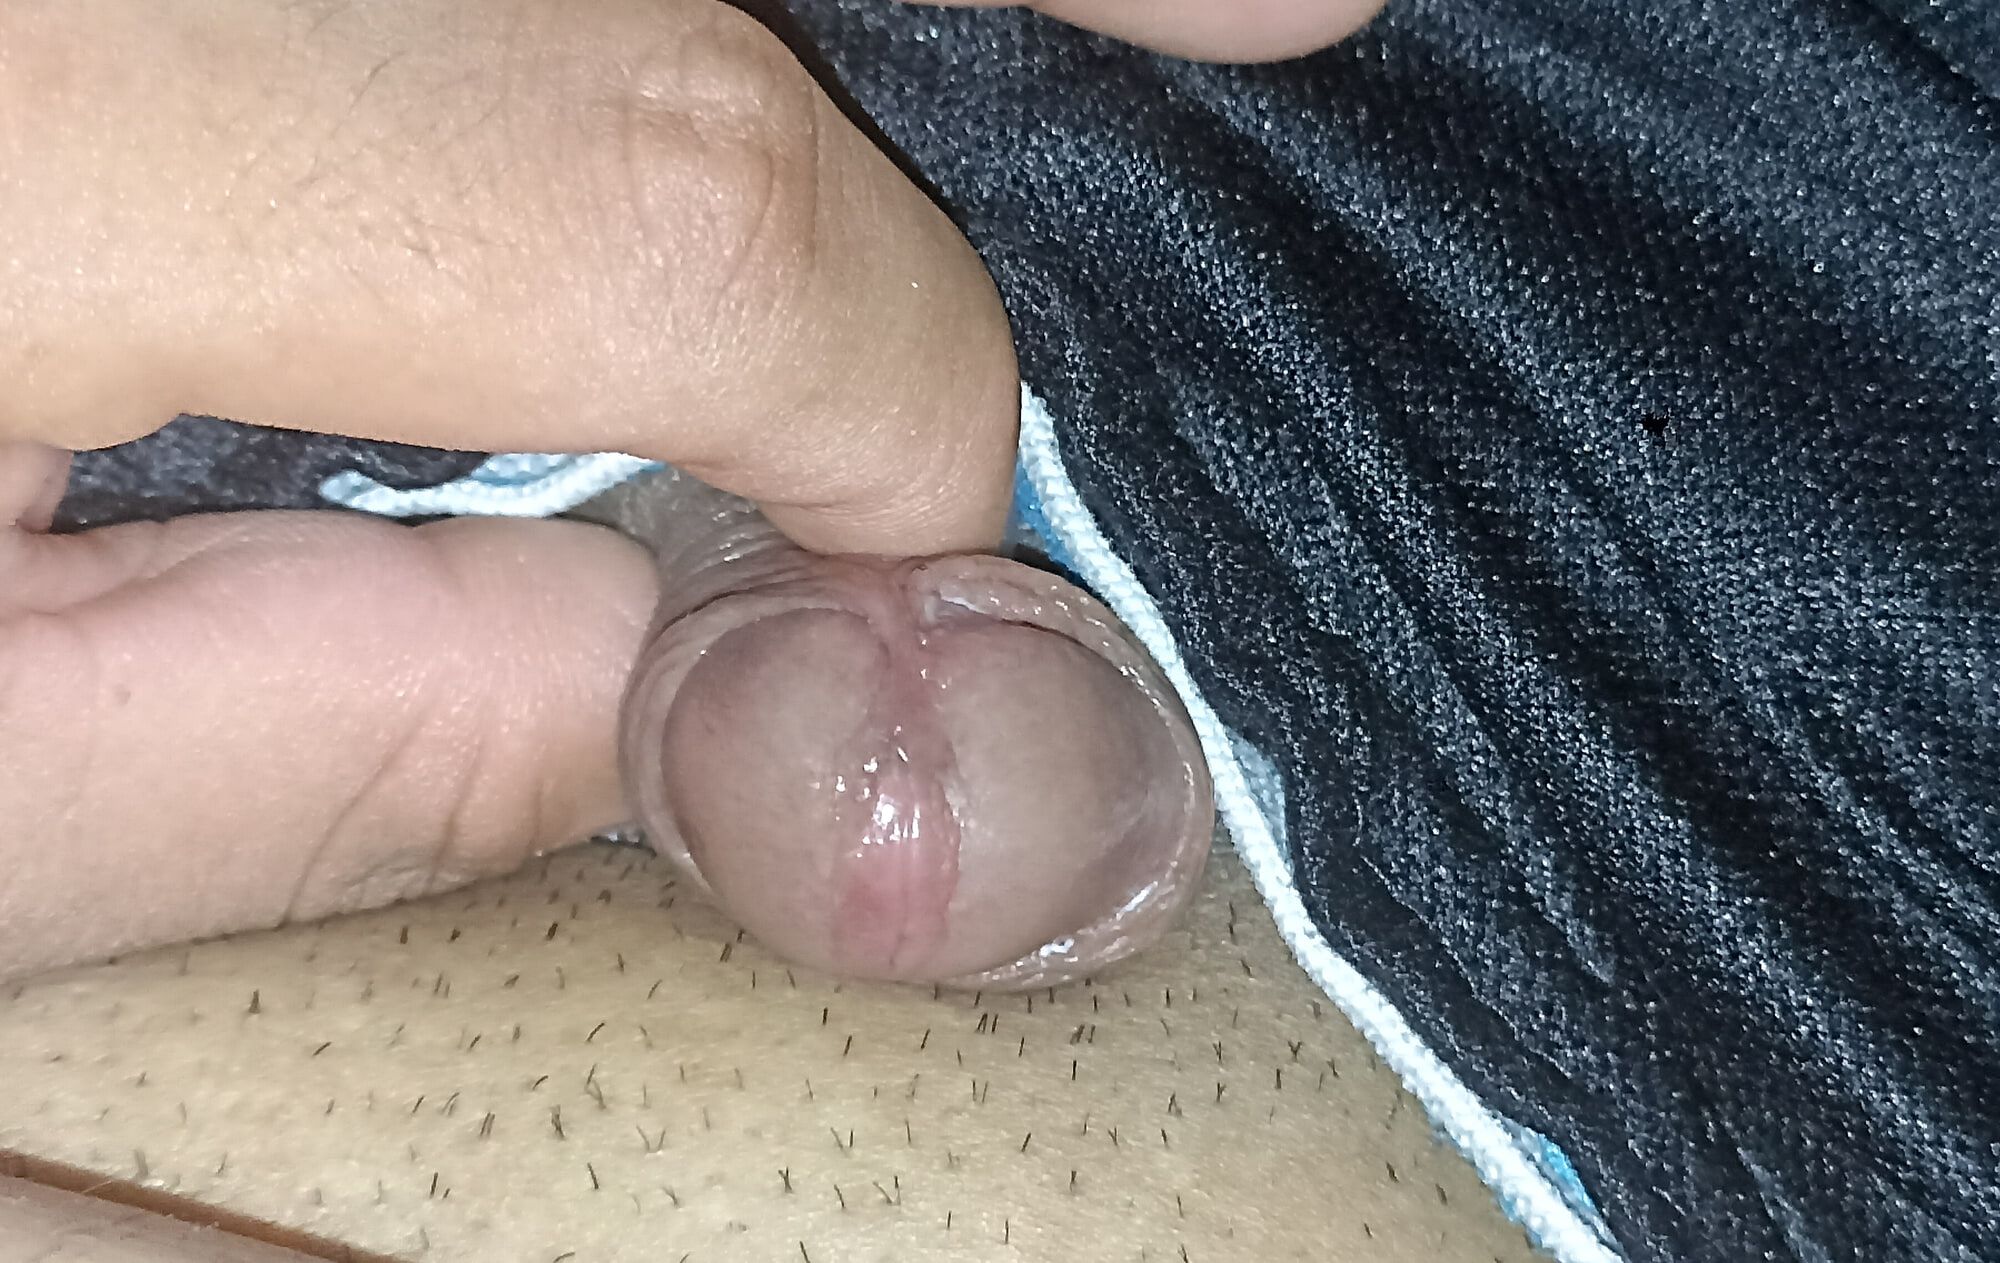 My little Flaccid Penis (without Erection) - Compilation 2